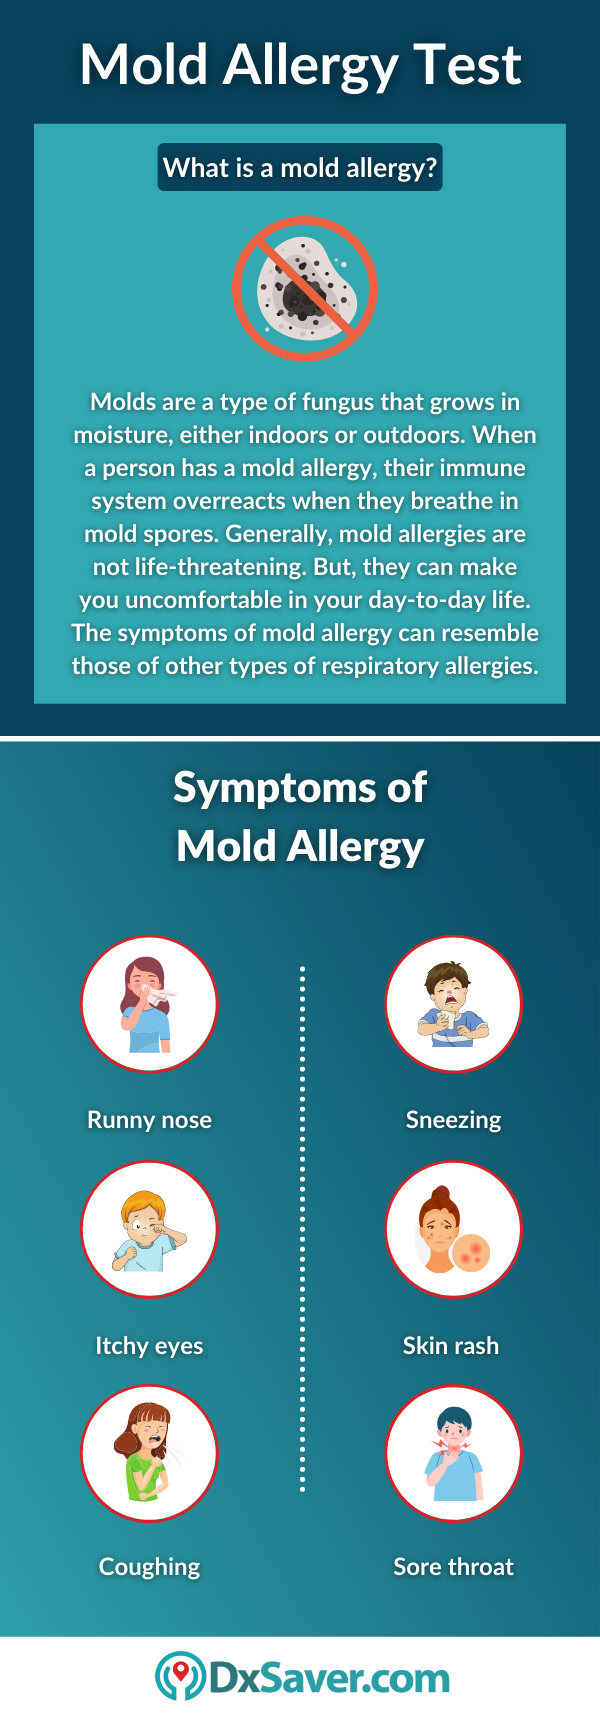 Mold Allergy Test and Symptoms of Mold Allergy